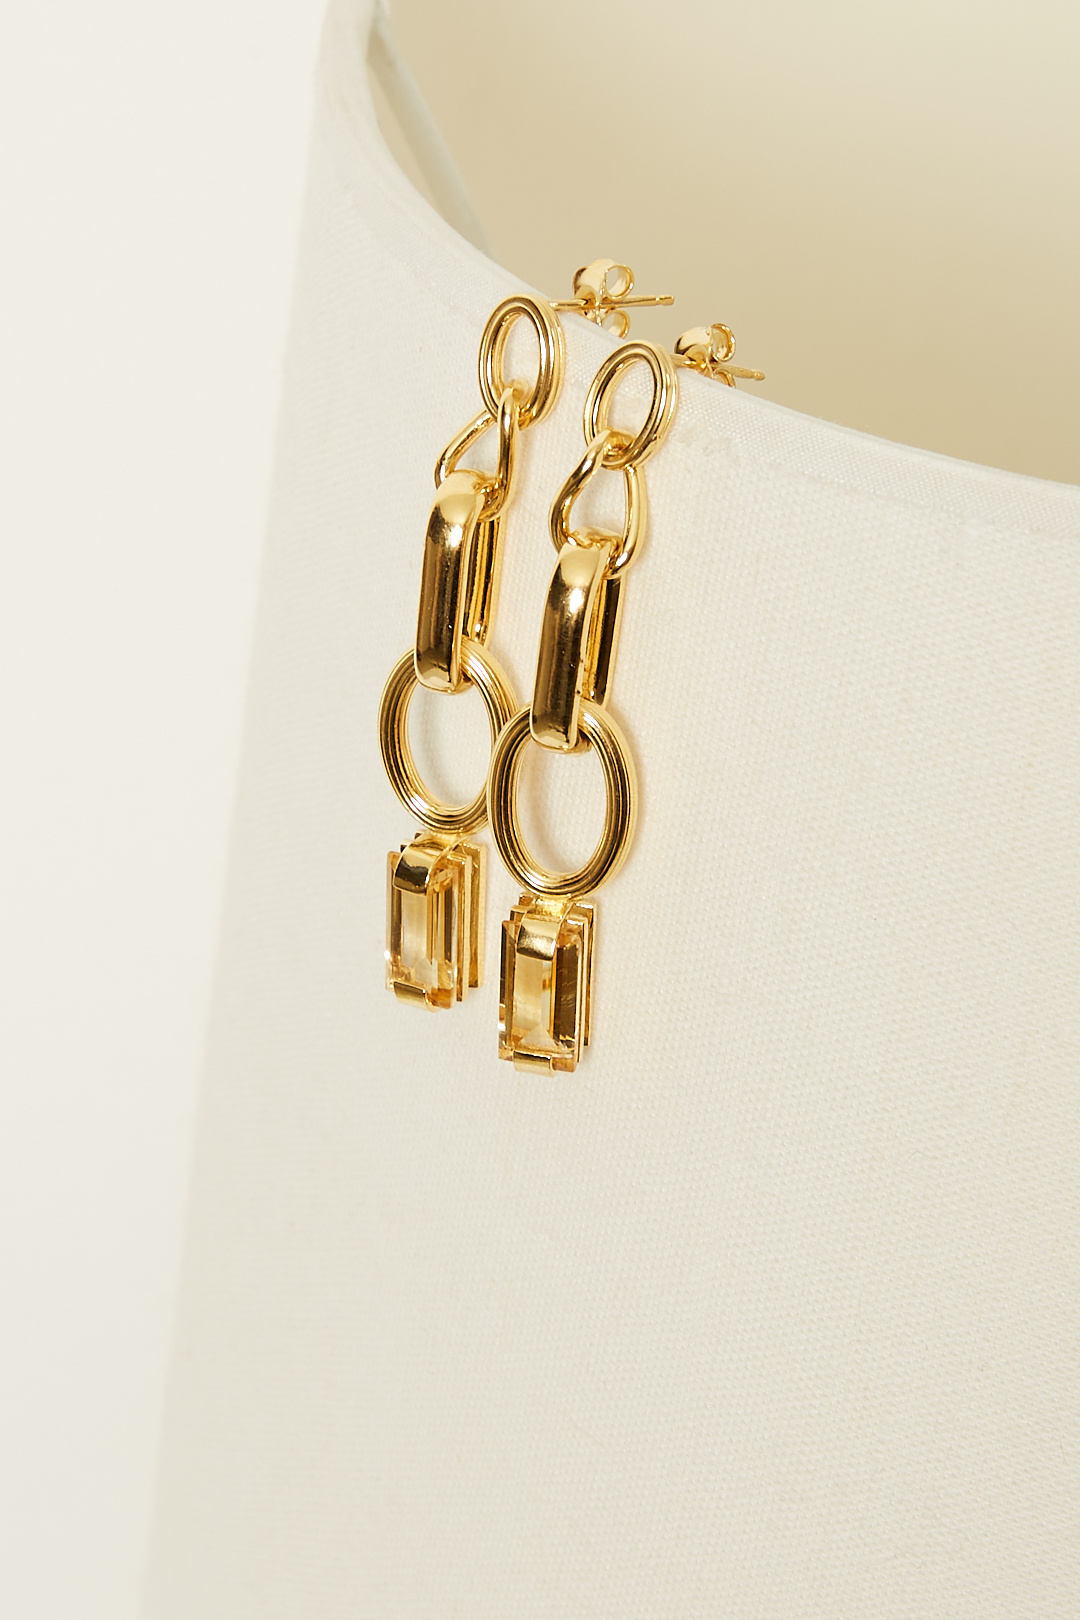 Studio Collect Shine earrings with citrine